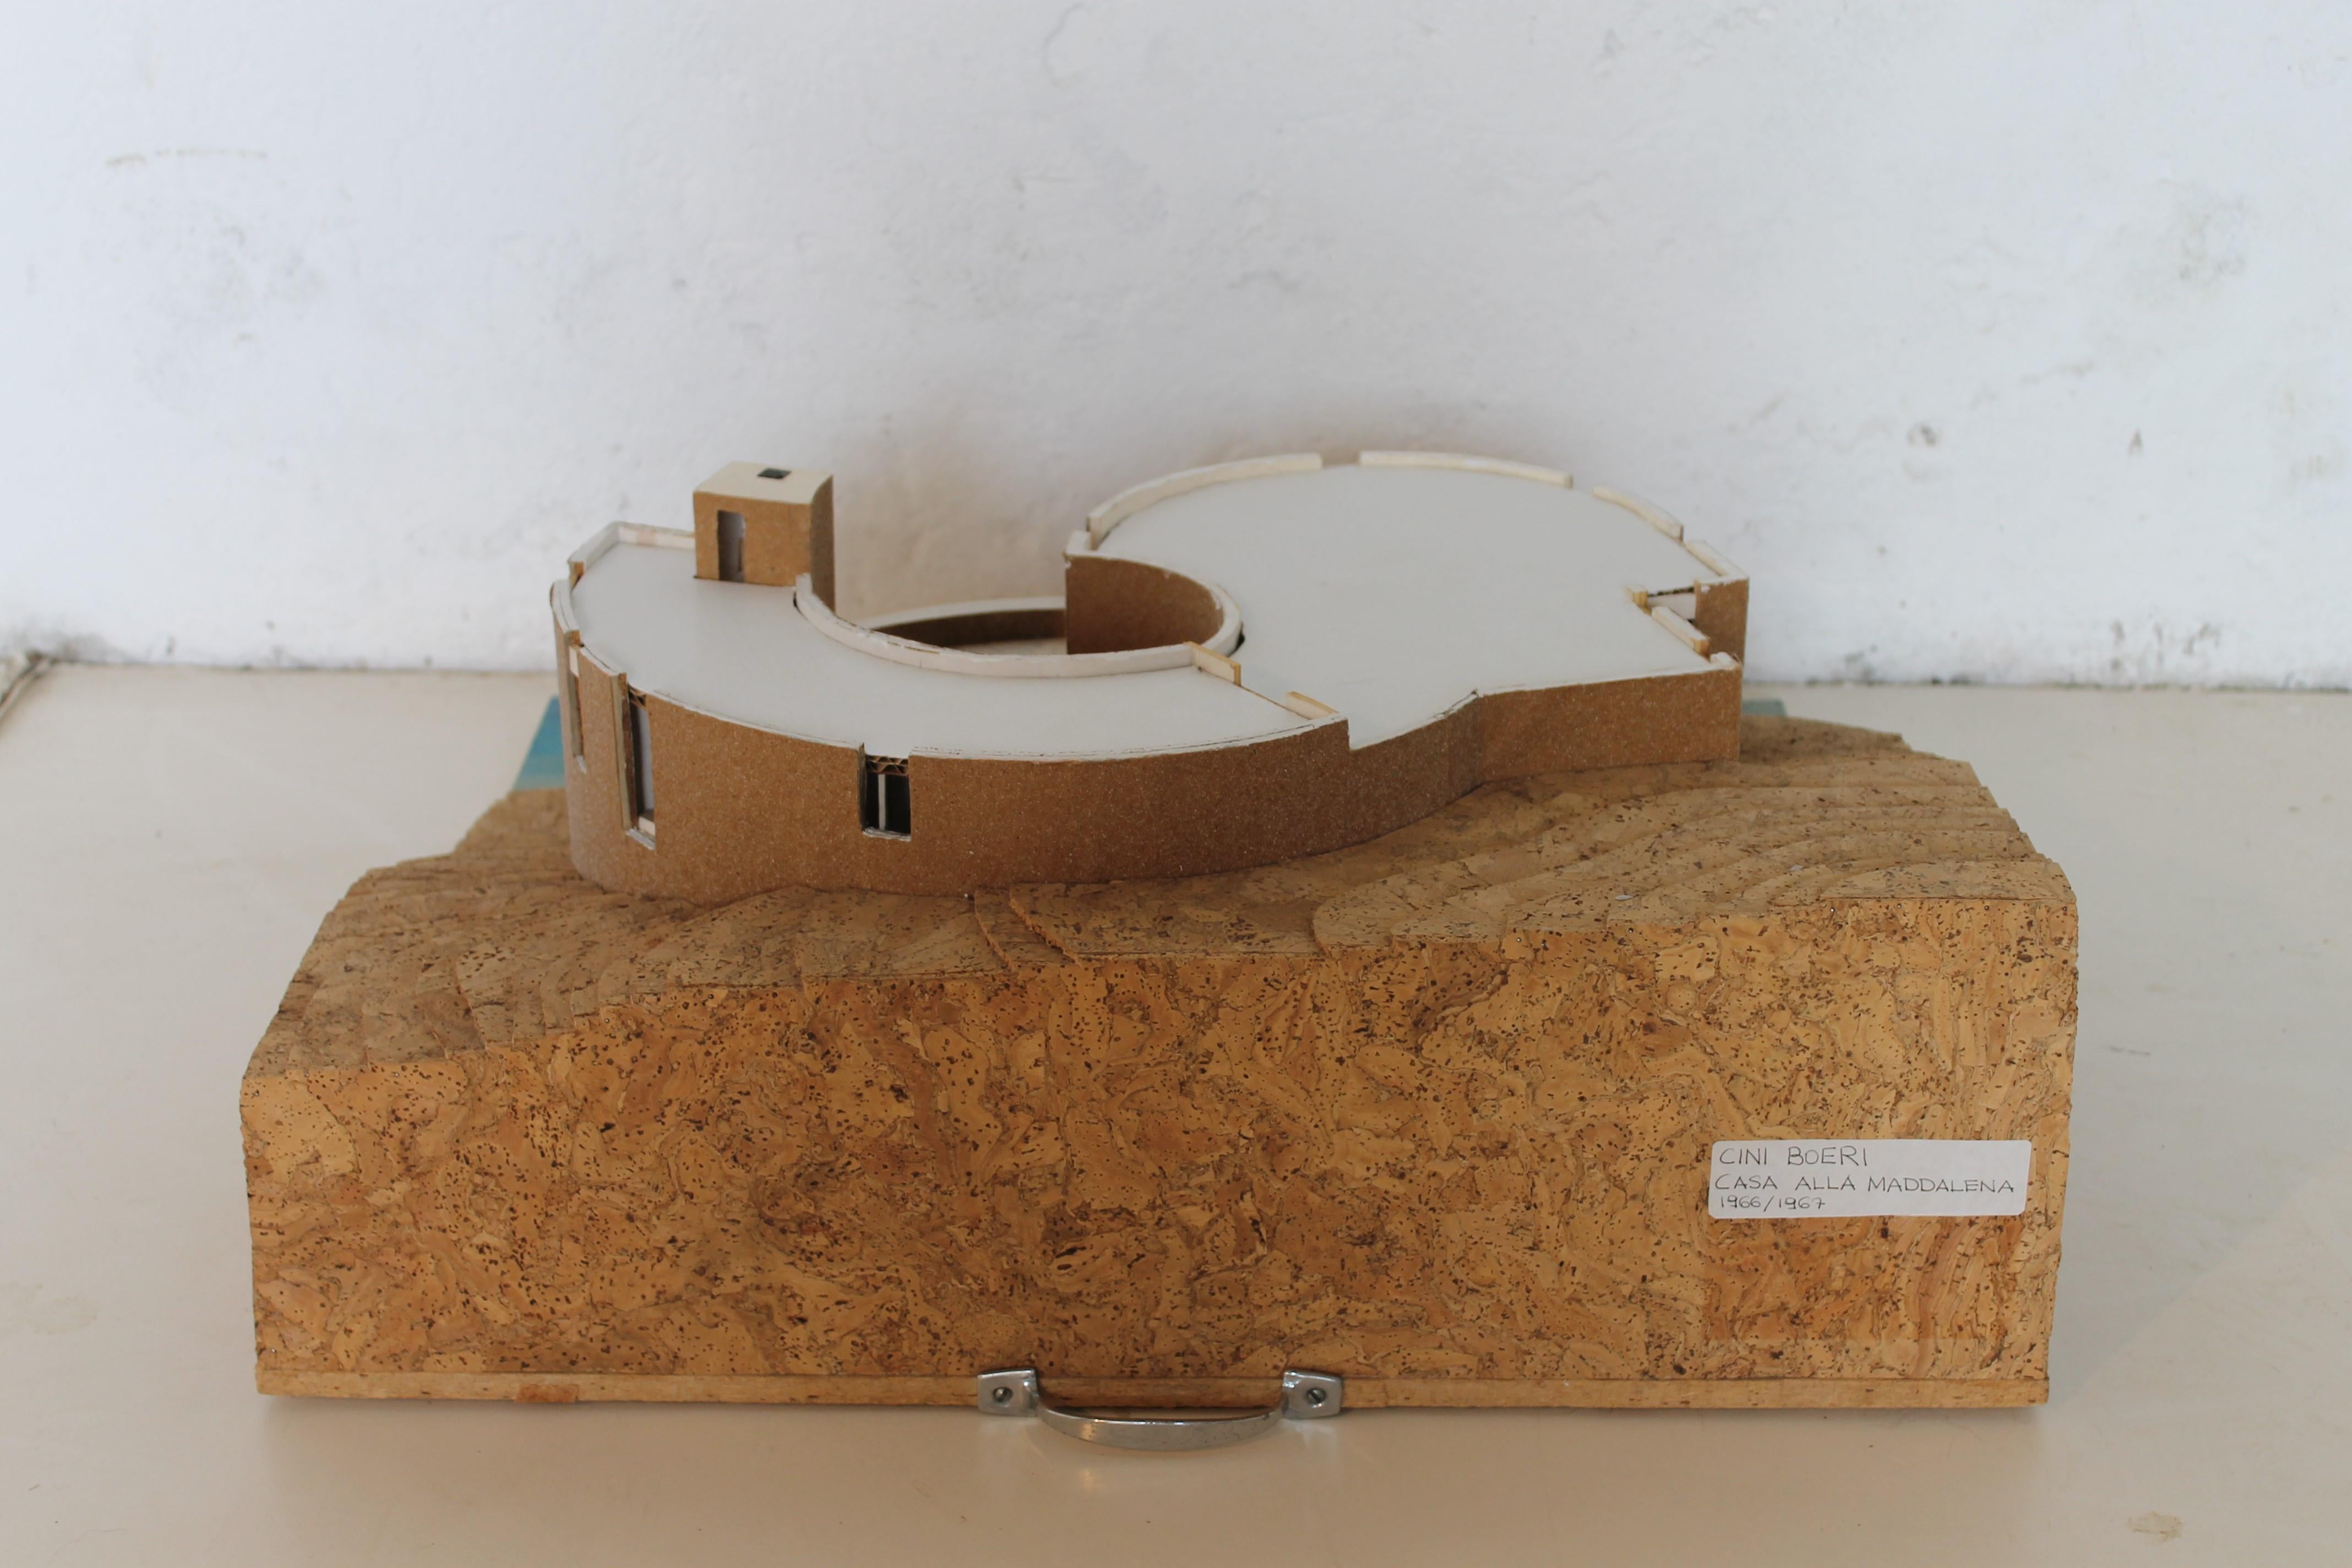 Model of Cini Boeri, Casa alla Maddalena, Punta Cannone, La Maddalena, Sassari, 1966-1967

This house is perfectly adapted to the steep slope of the land, built in an equilibrium point. It is designed by several circles with a central one which is